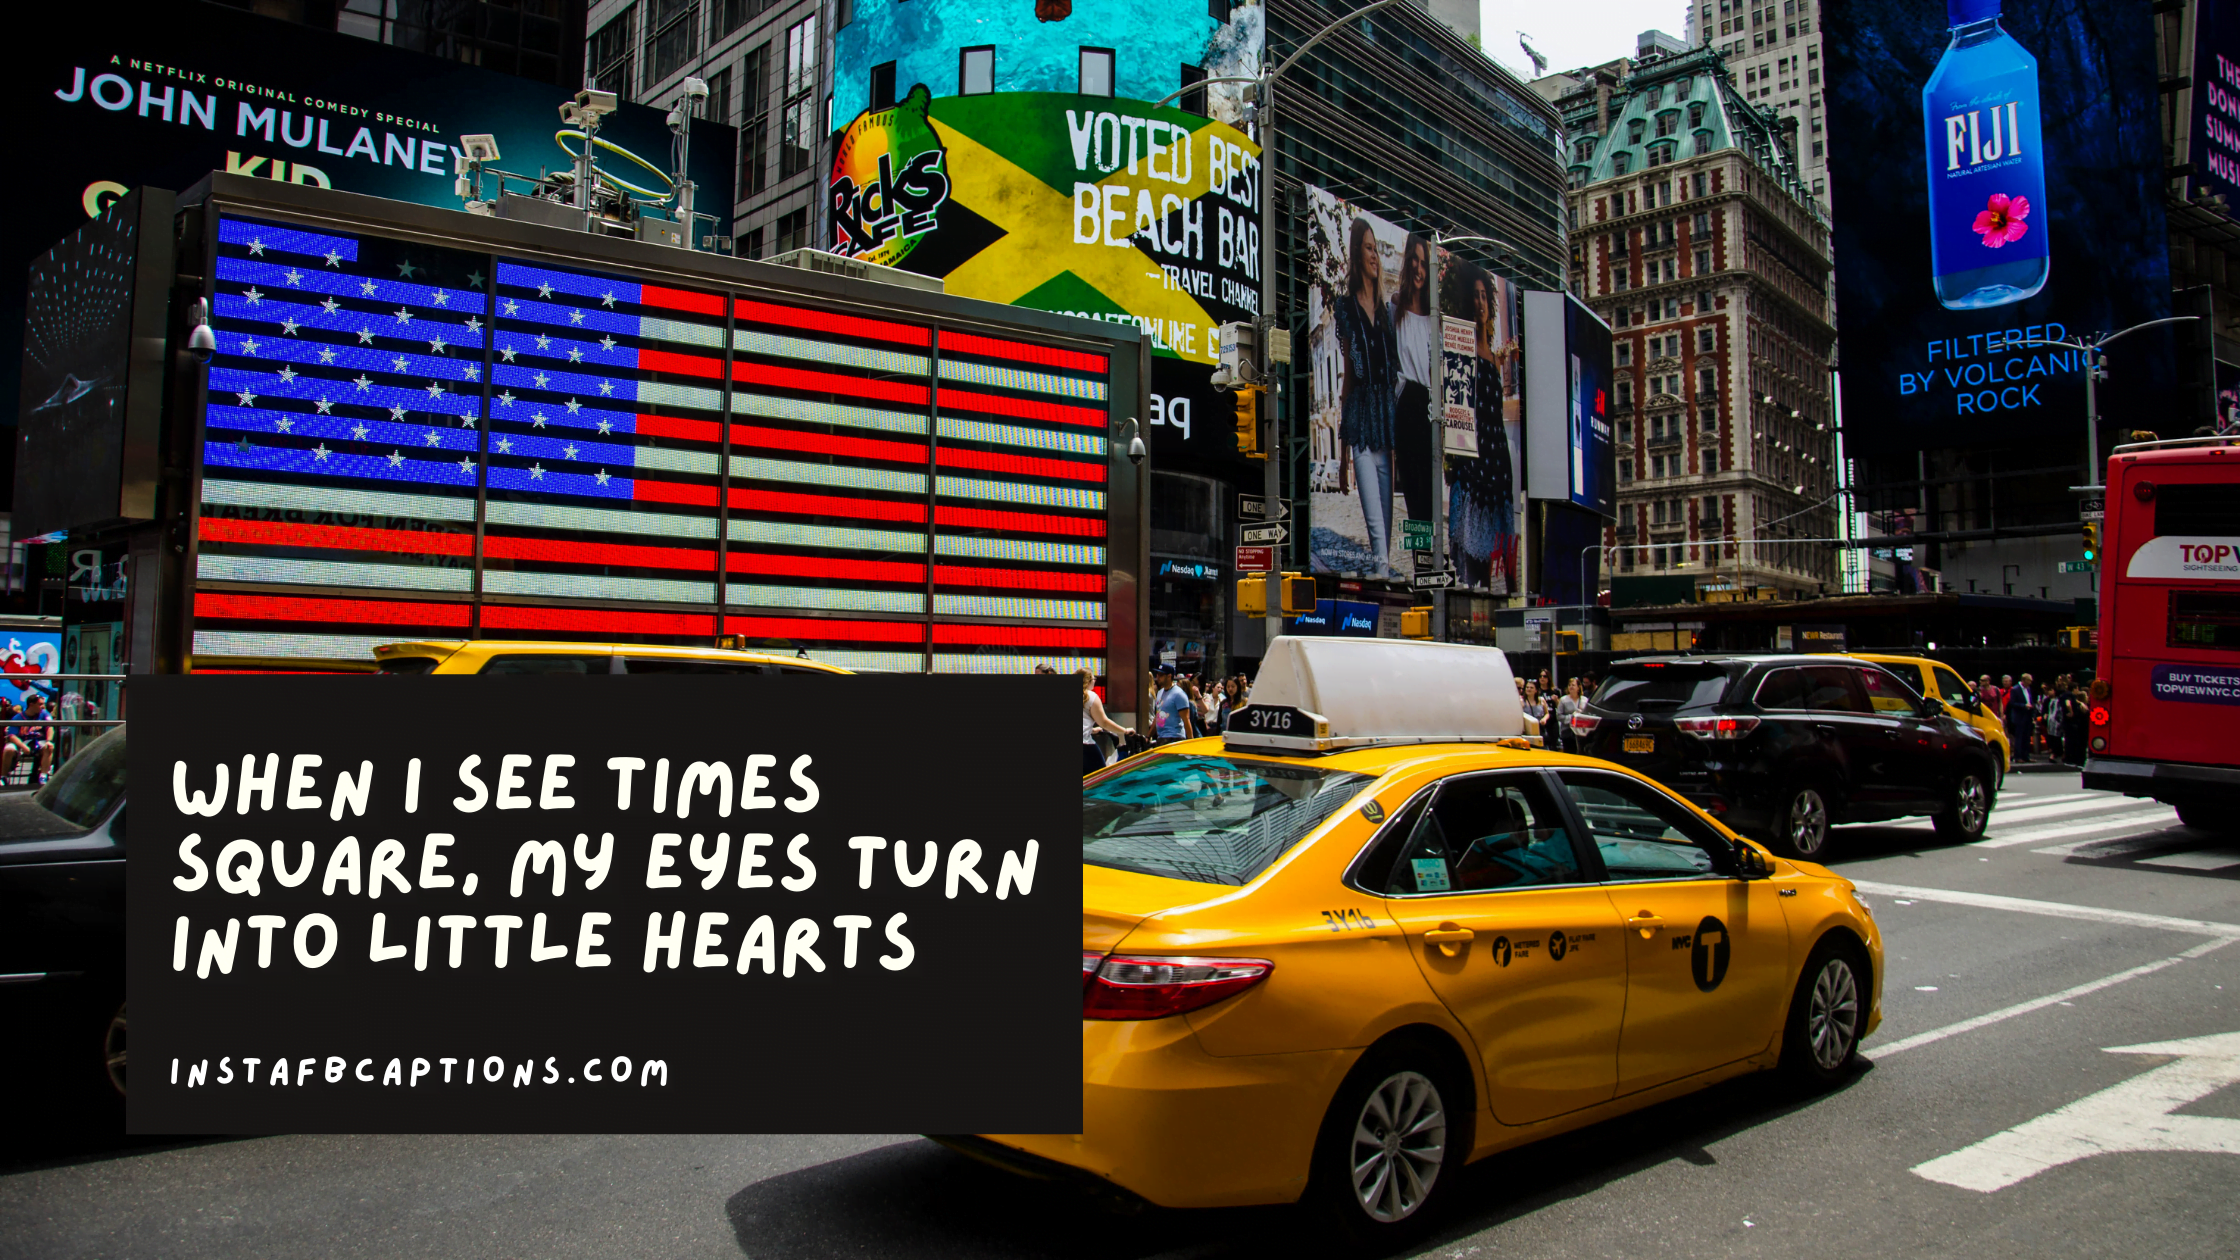 Good Times Square Captions  - Good Times Square Captions - 94 Times Square Instagram Captions Quotes Hashtags in 2022